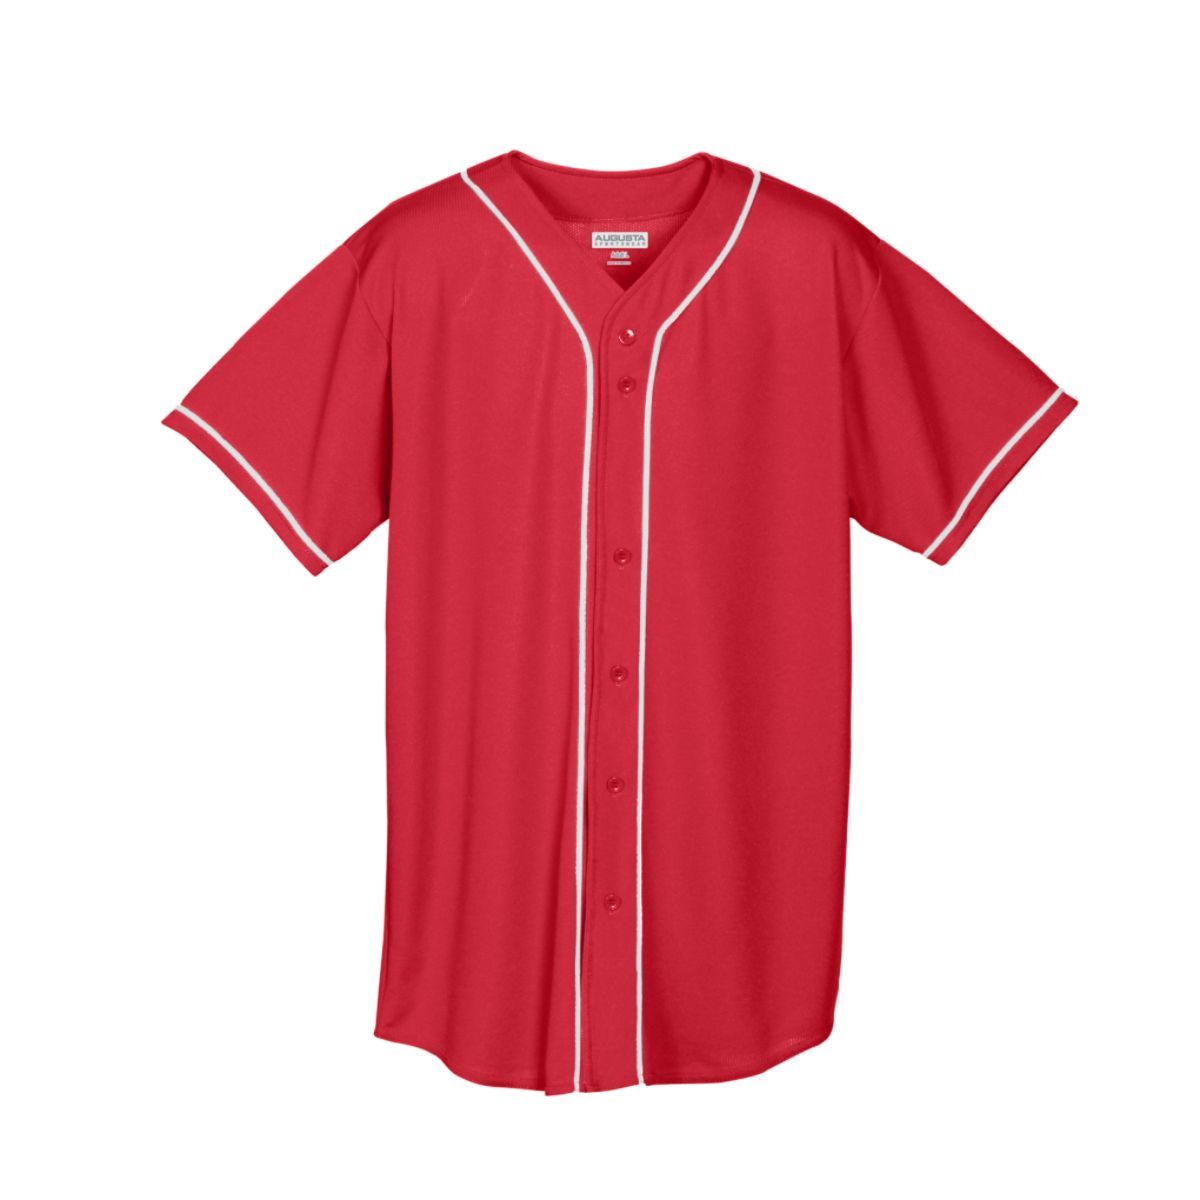 Augusta Sportswear Youth Wicking Mesh Button Front Jersey in Red/White  -Part of the Youth, Youth-Jersey, Augusta-Products, Baseball, Shirts, All-Sports, All-Sports-1 product lines at KanaleyCreations.com